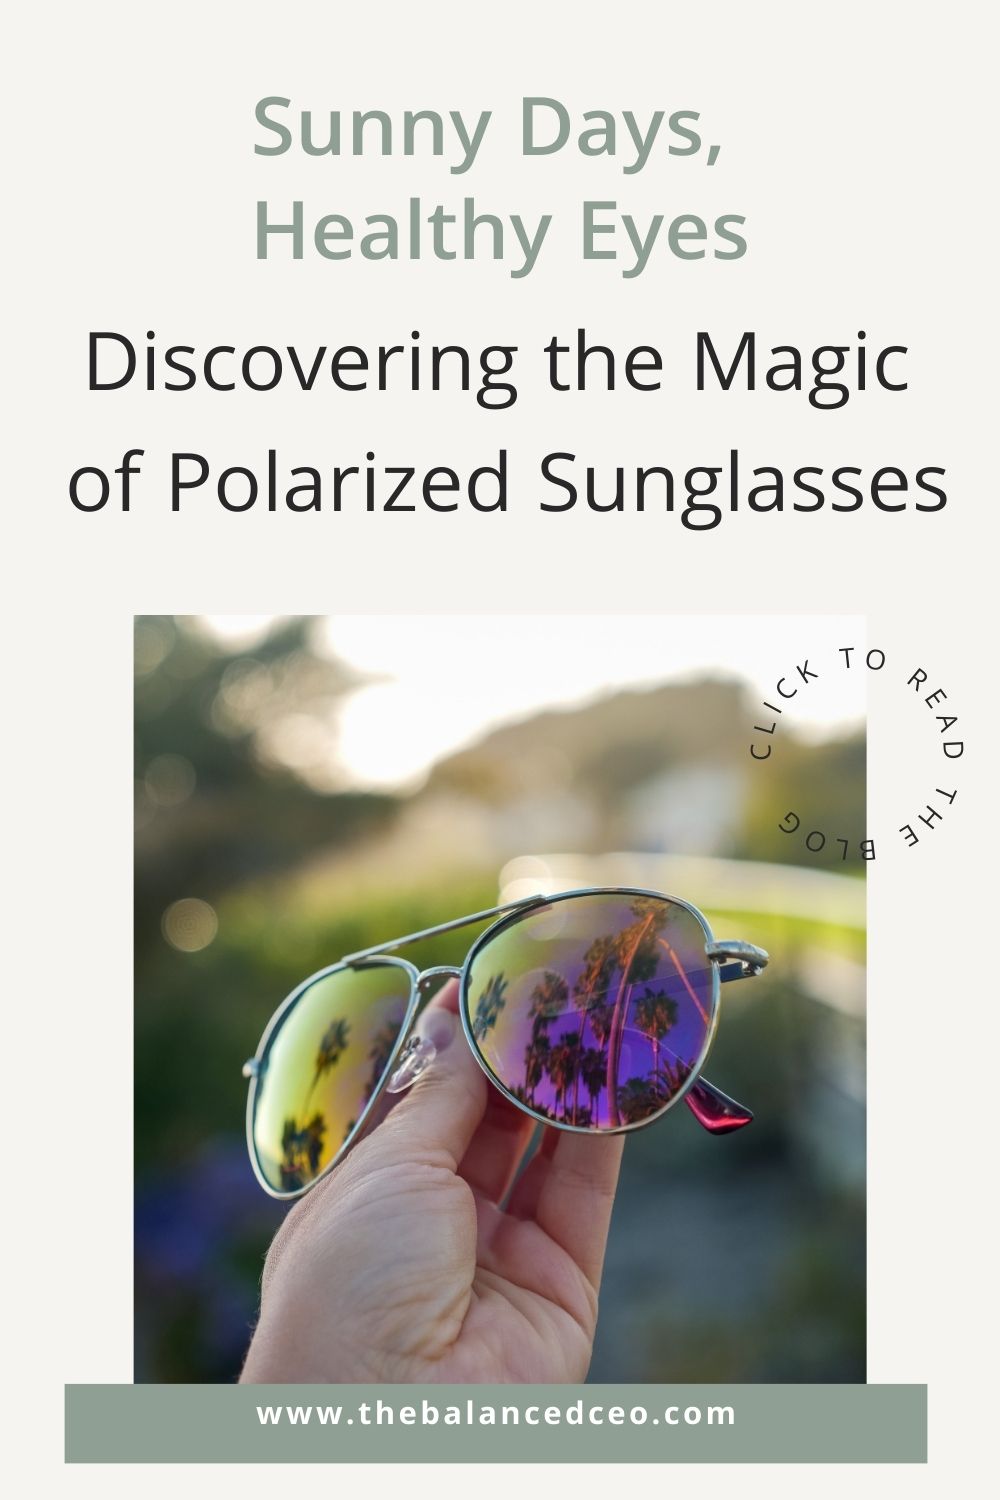 Sunny Days, Healthy Eyes: Discovering the Magic of Polarized Sunglasses